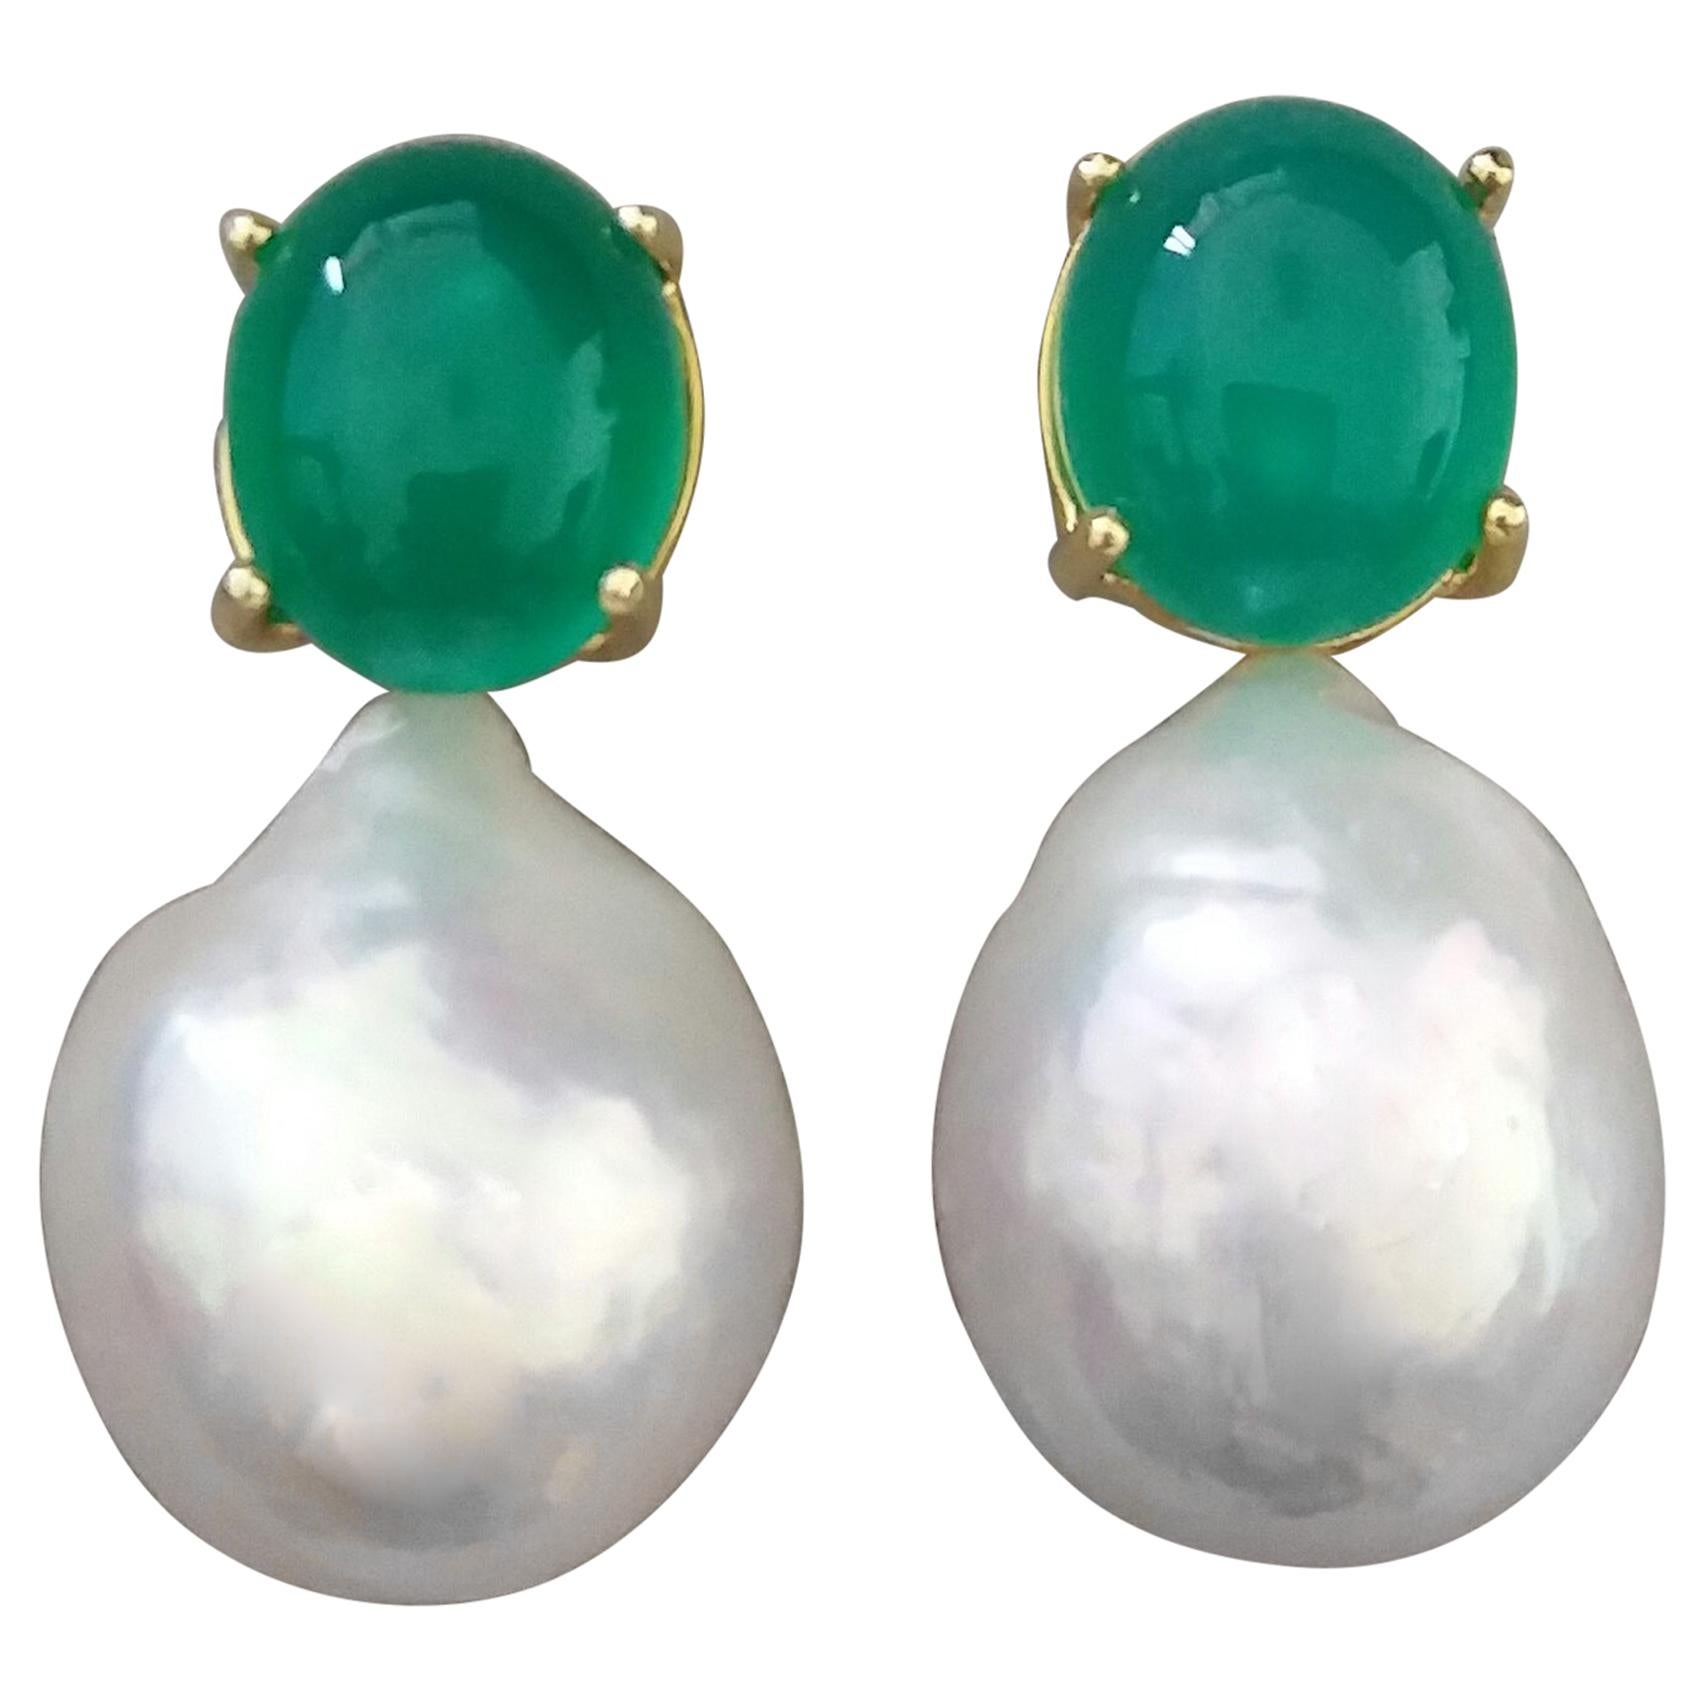 Big Size White Baroque Pearls Oval Green Onyx Cabochons Yellow Gold Earrings